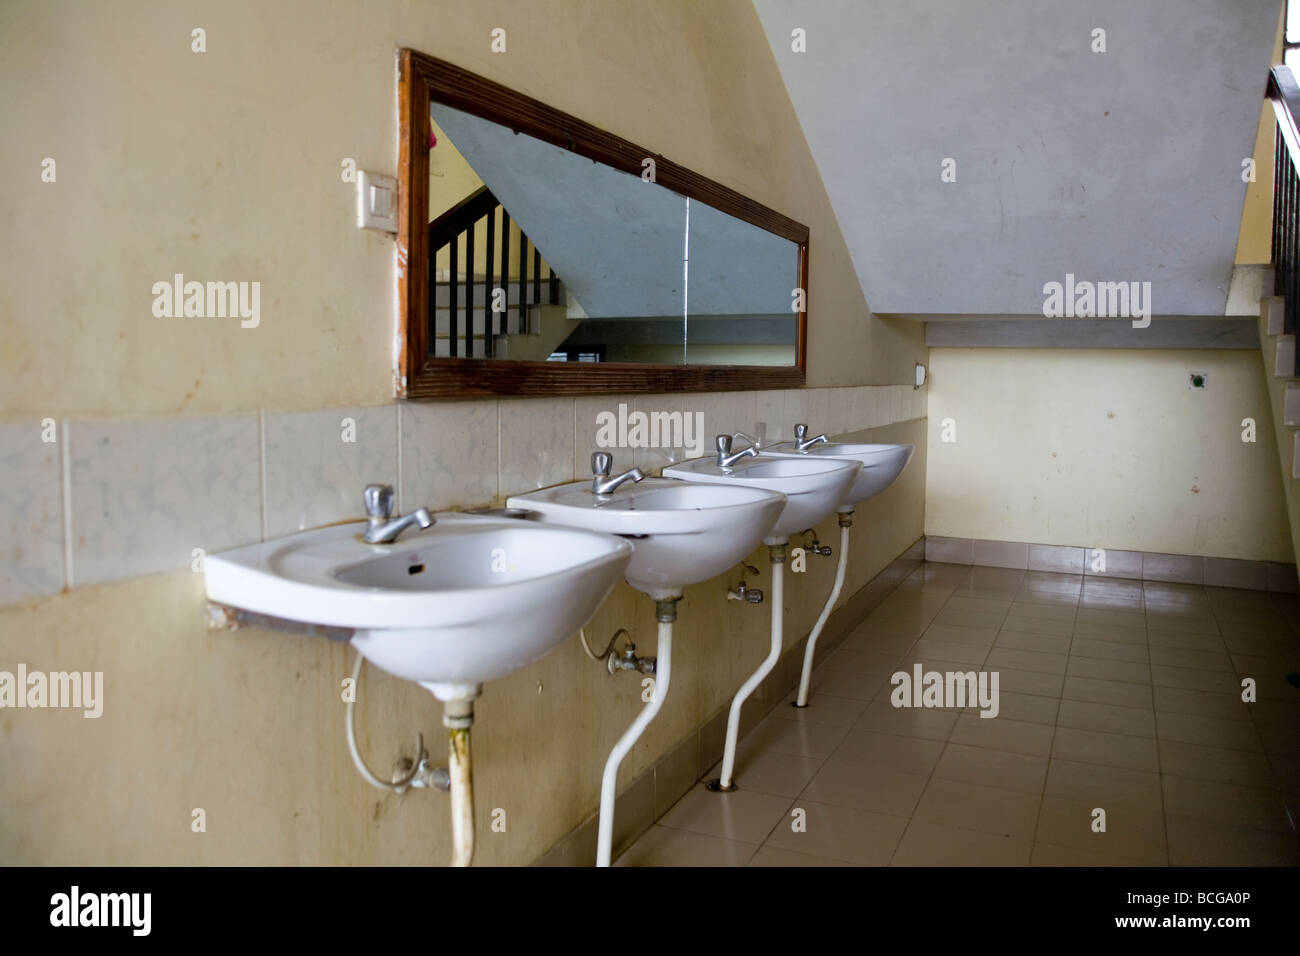 Four sinks along a wall Stock Photo